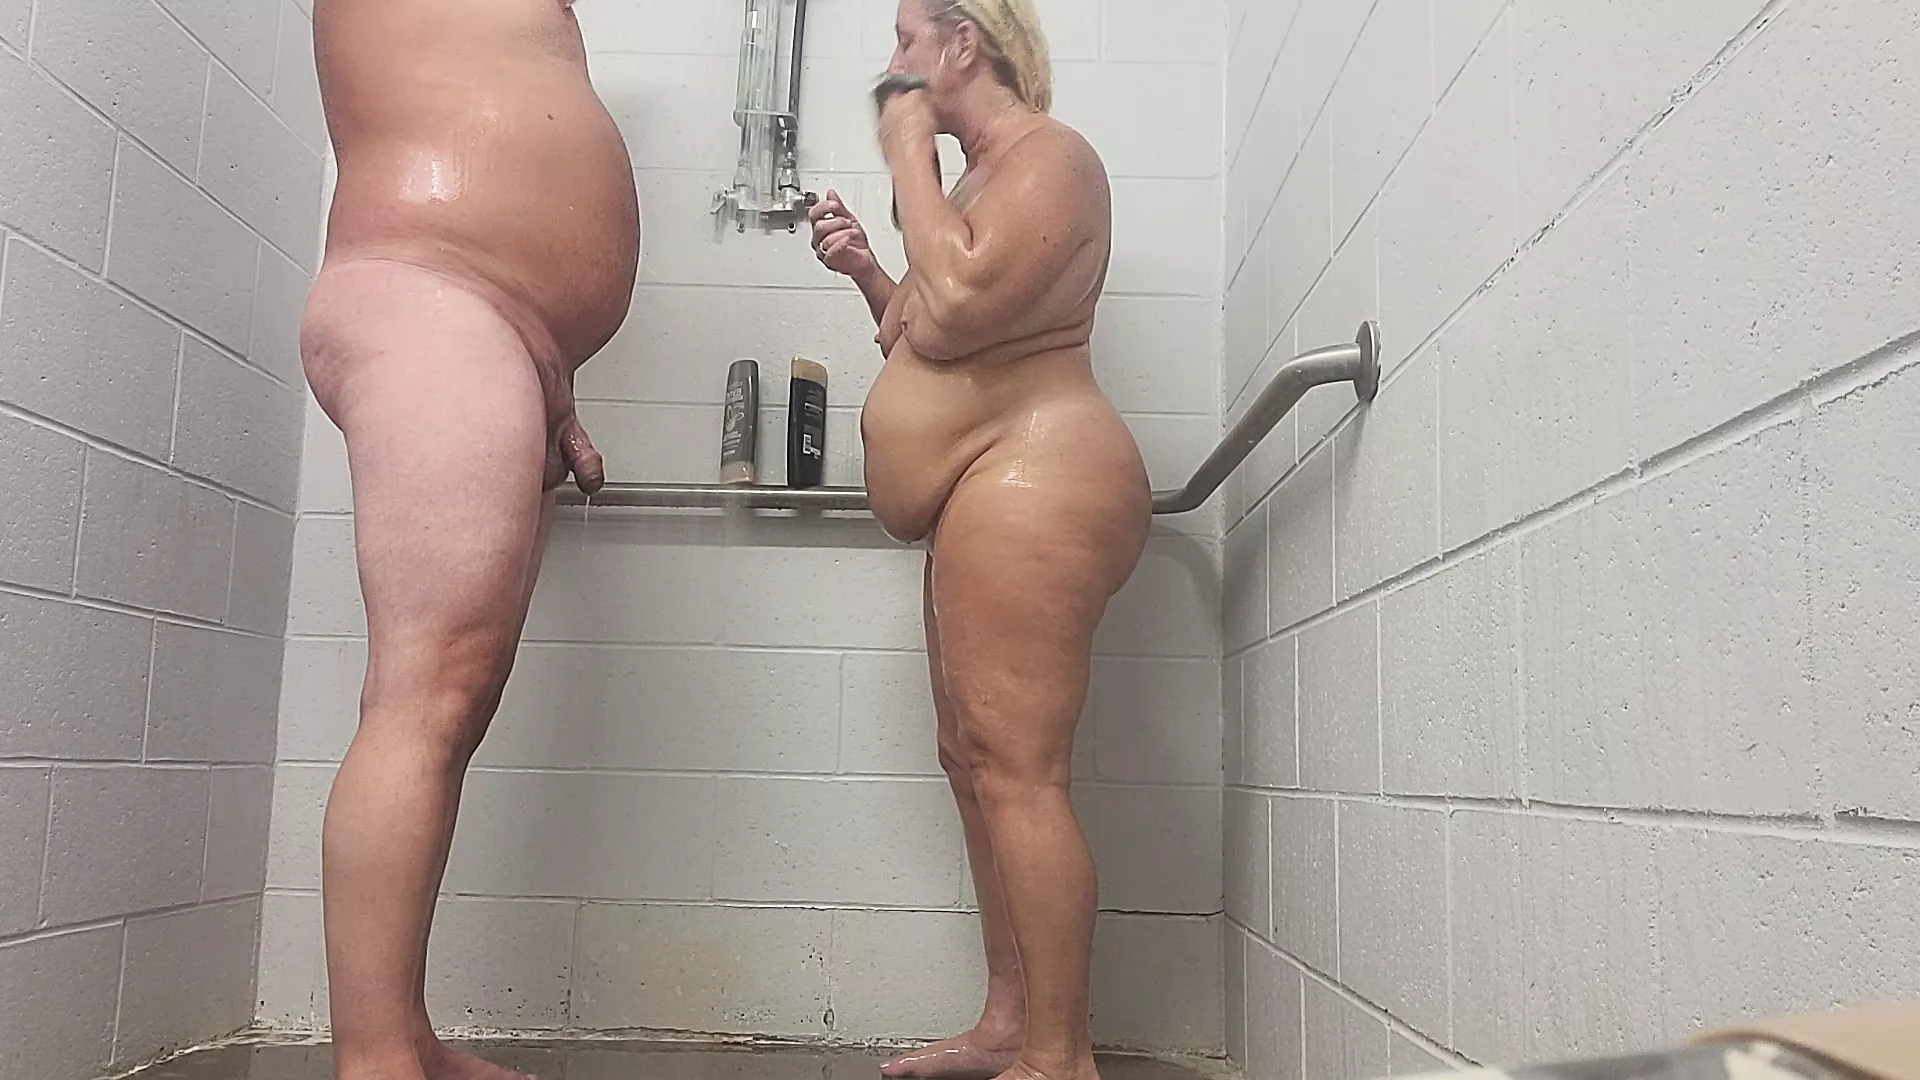 Shower sex with cum in her mouth, after a standing doggystyle session, tits are bouncing ass n thighs are jiggling photo